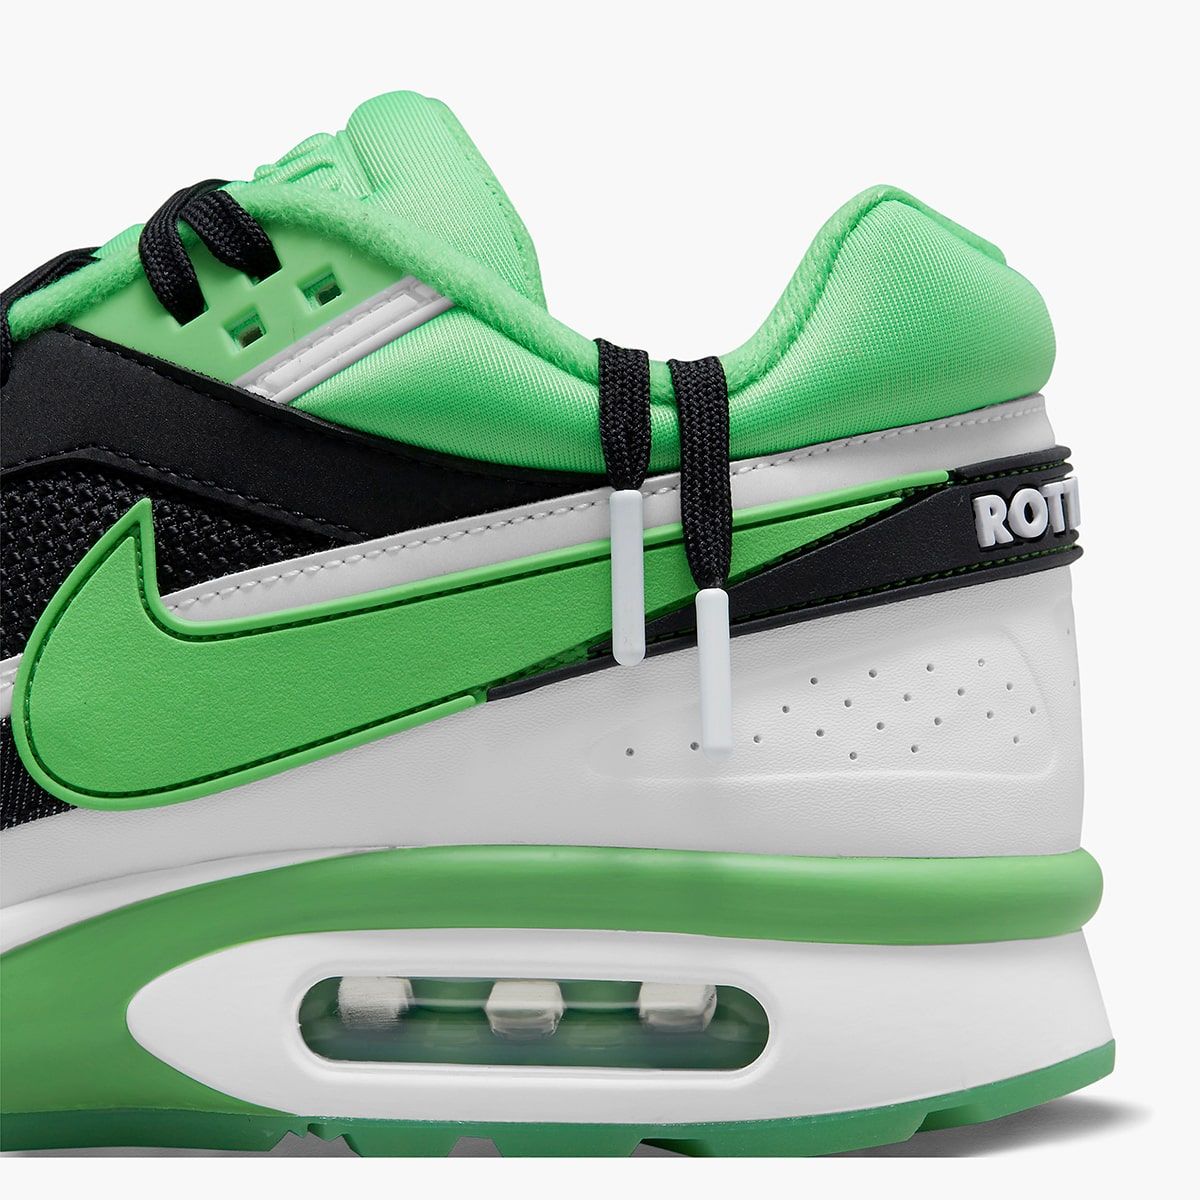 Nike Air Max BW City Pack - The Drop Date